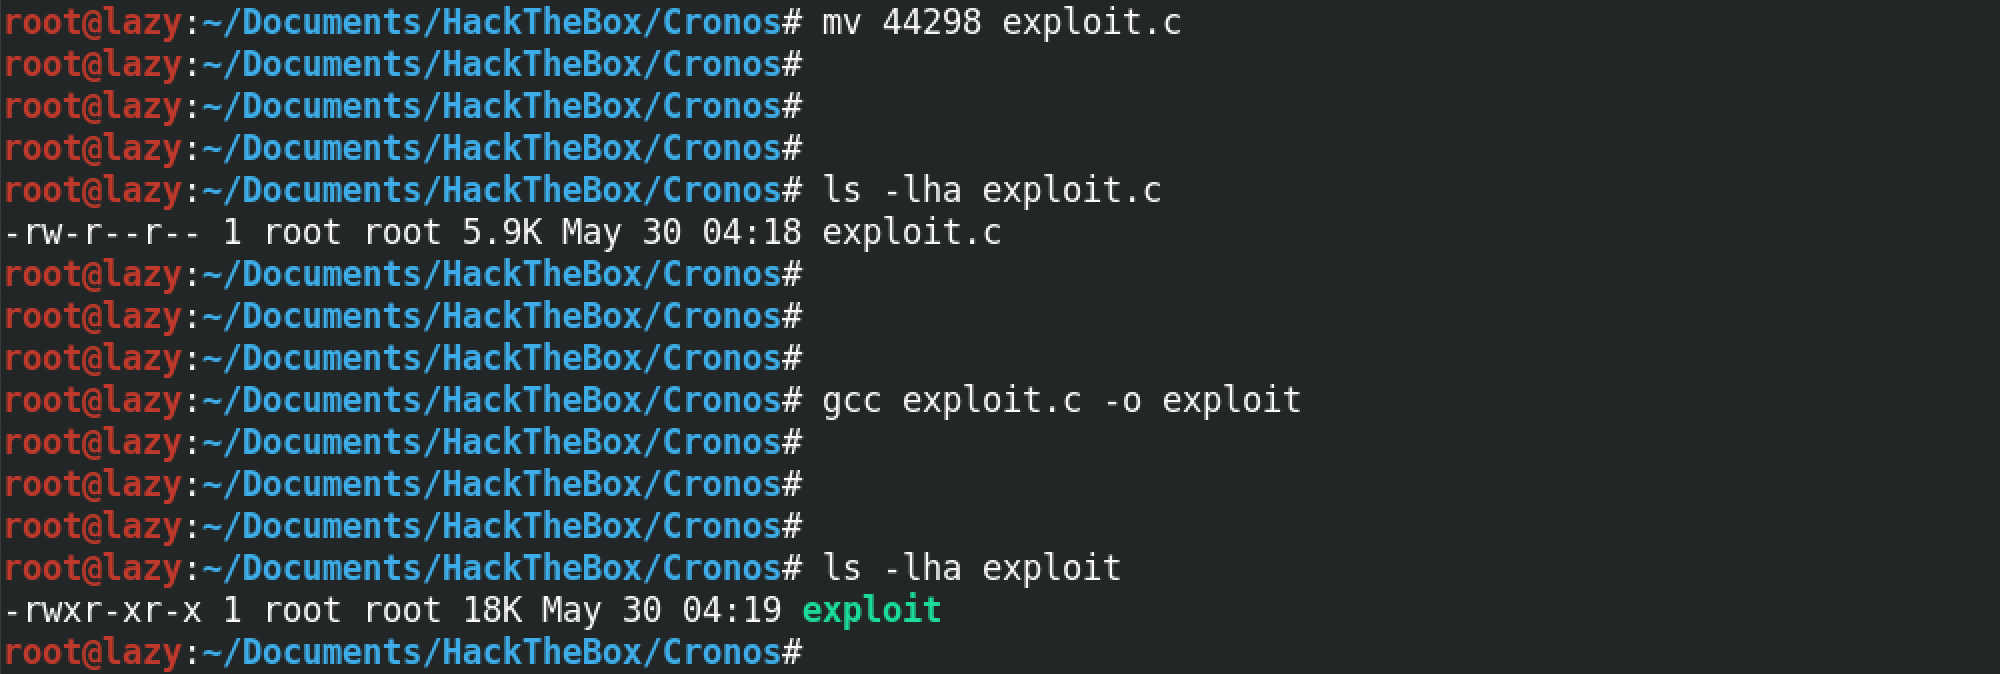 Compilation of the C script into a executable format for Linux.